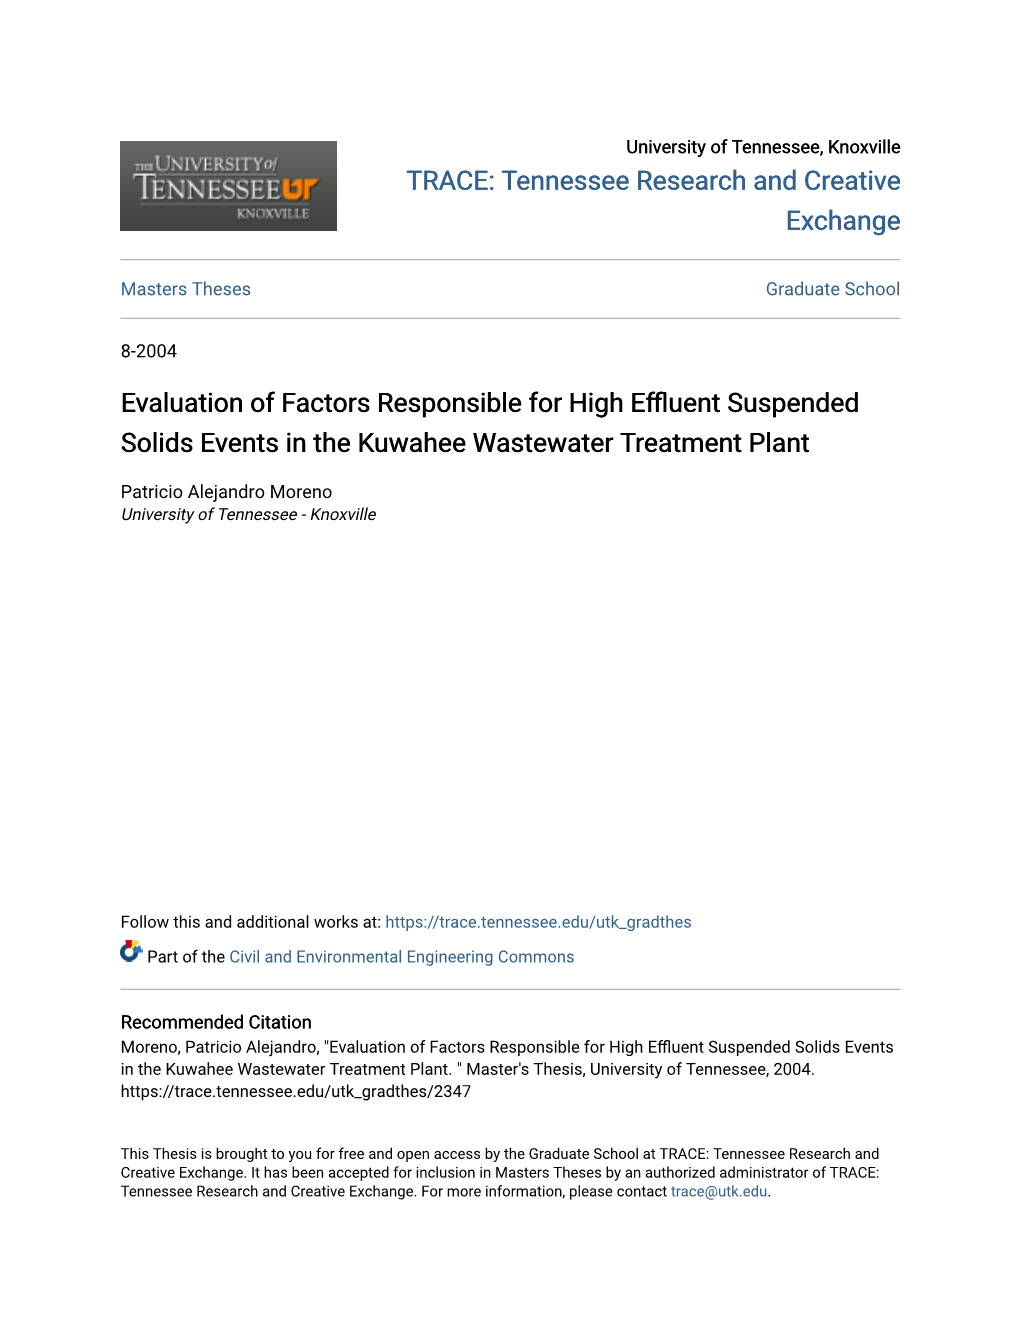 Evaluation of Factors Responsible for High Effluent Suspended Solids Events in the Kuwahee Wastewater Treatment Plant